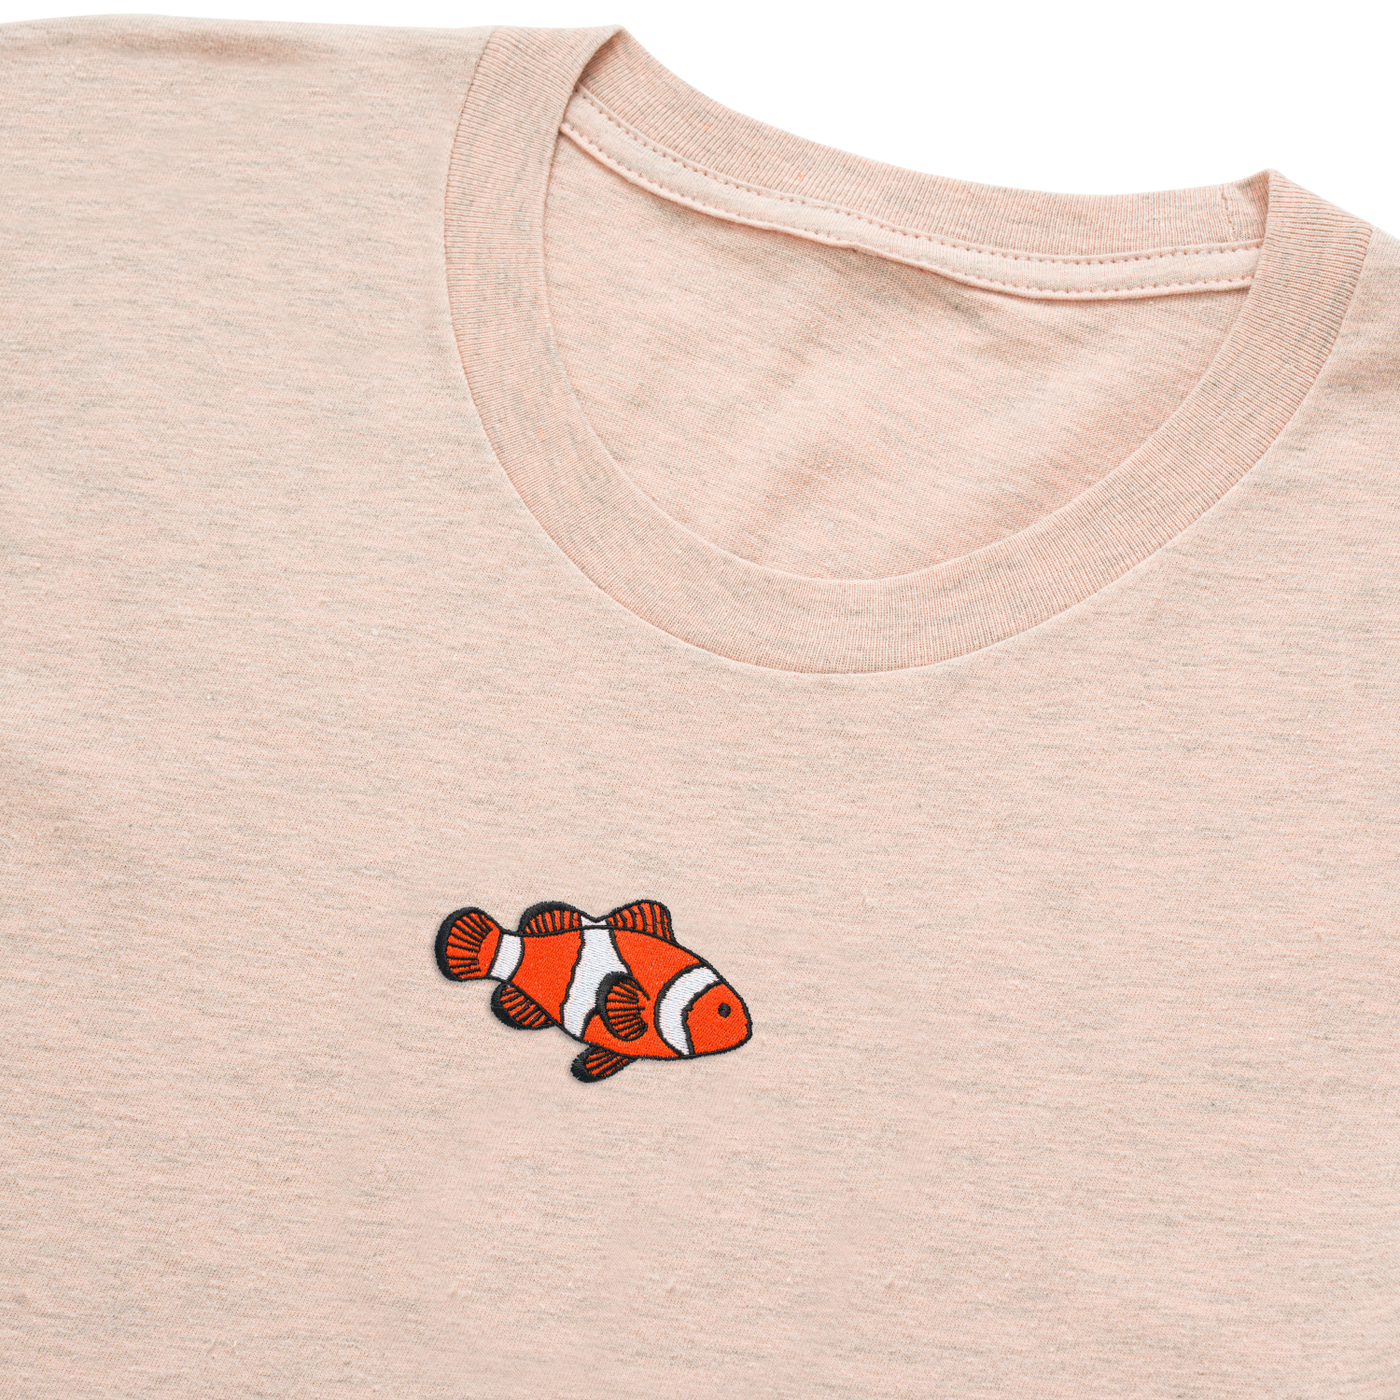 Bobby's Planet Women's Embroidered Clownfish T-Shirt from Seven Seas Fish Animals Collection in Heather Prism Peach Color#color_heather-prism-peach